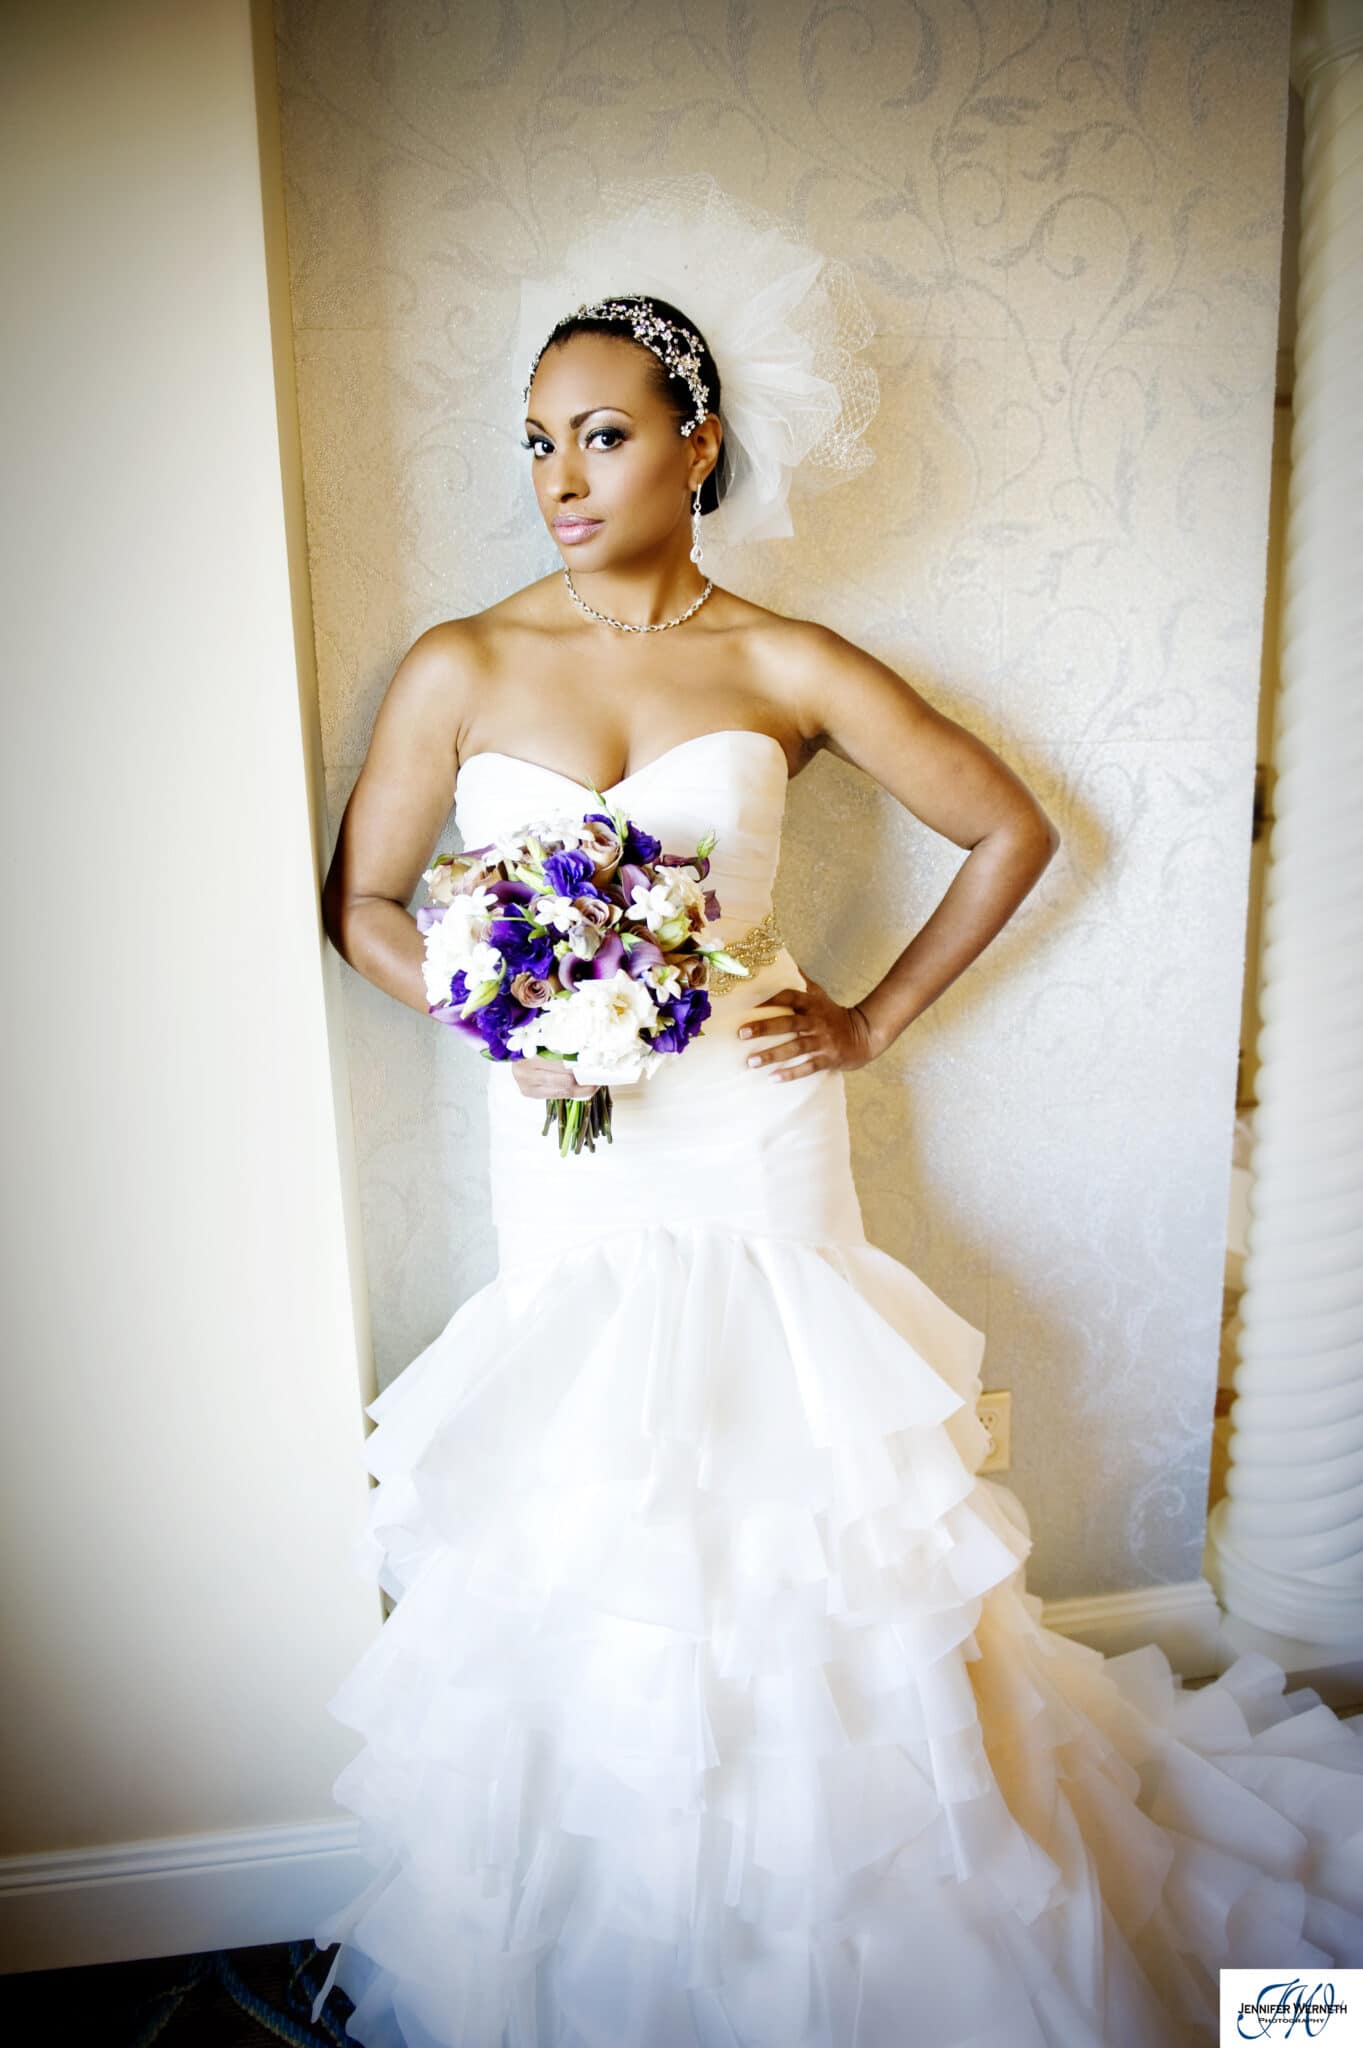 Bride leaning against a wall. She has a sleeveless dress and holds purple and white flowers